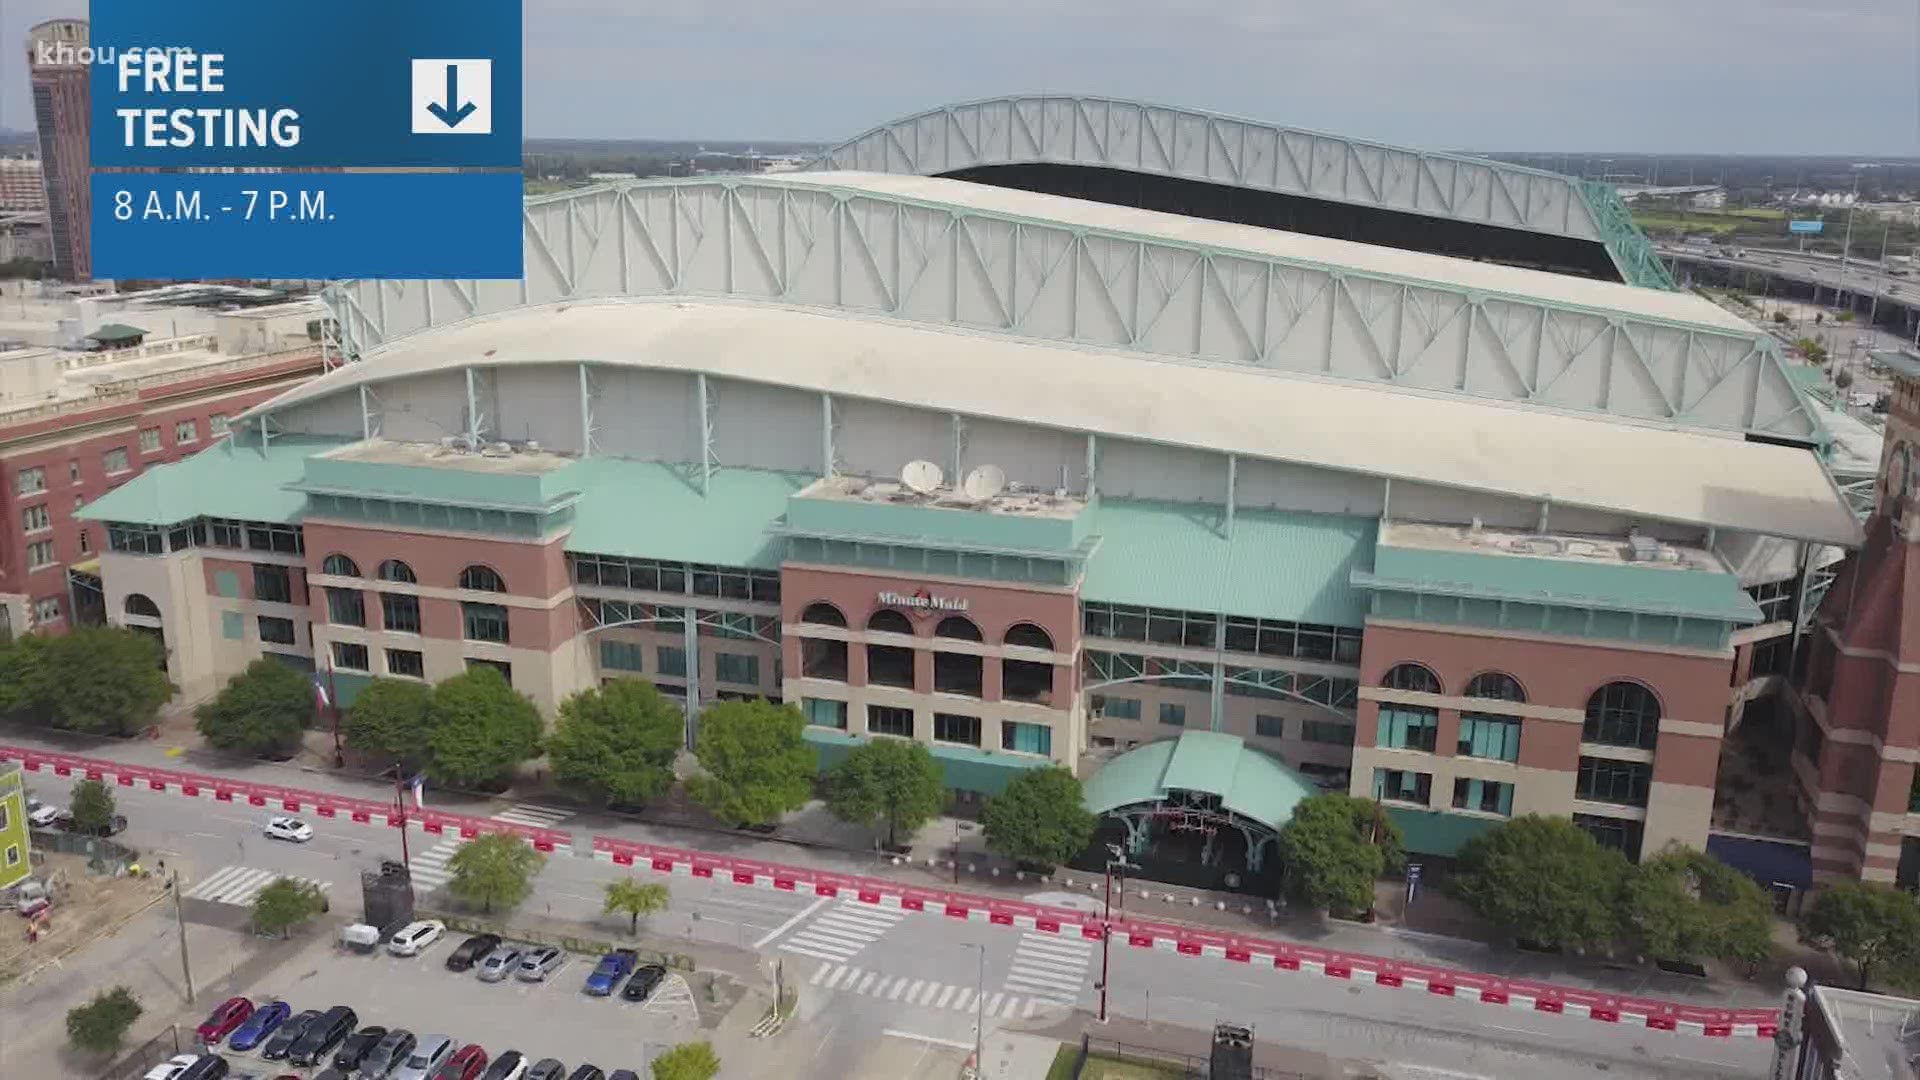 The home of the Houston Astros will serve as a COVID-19 testing site starting on Saturday, Aug. 8.